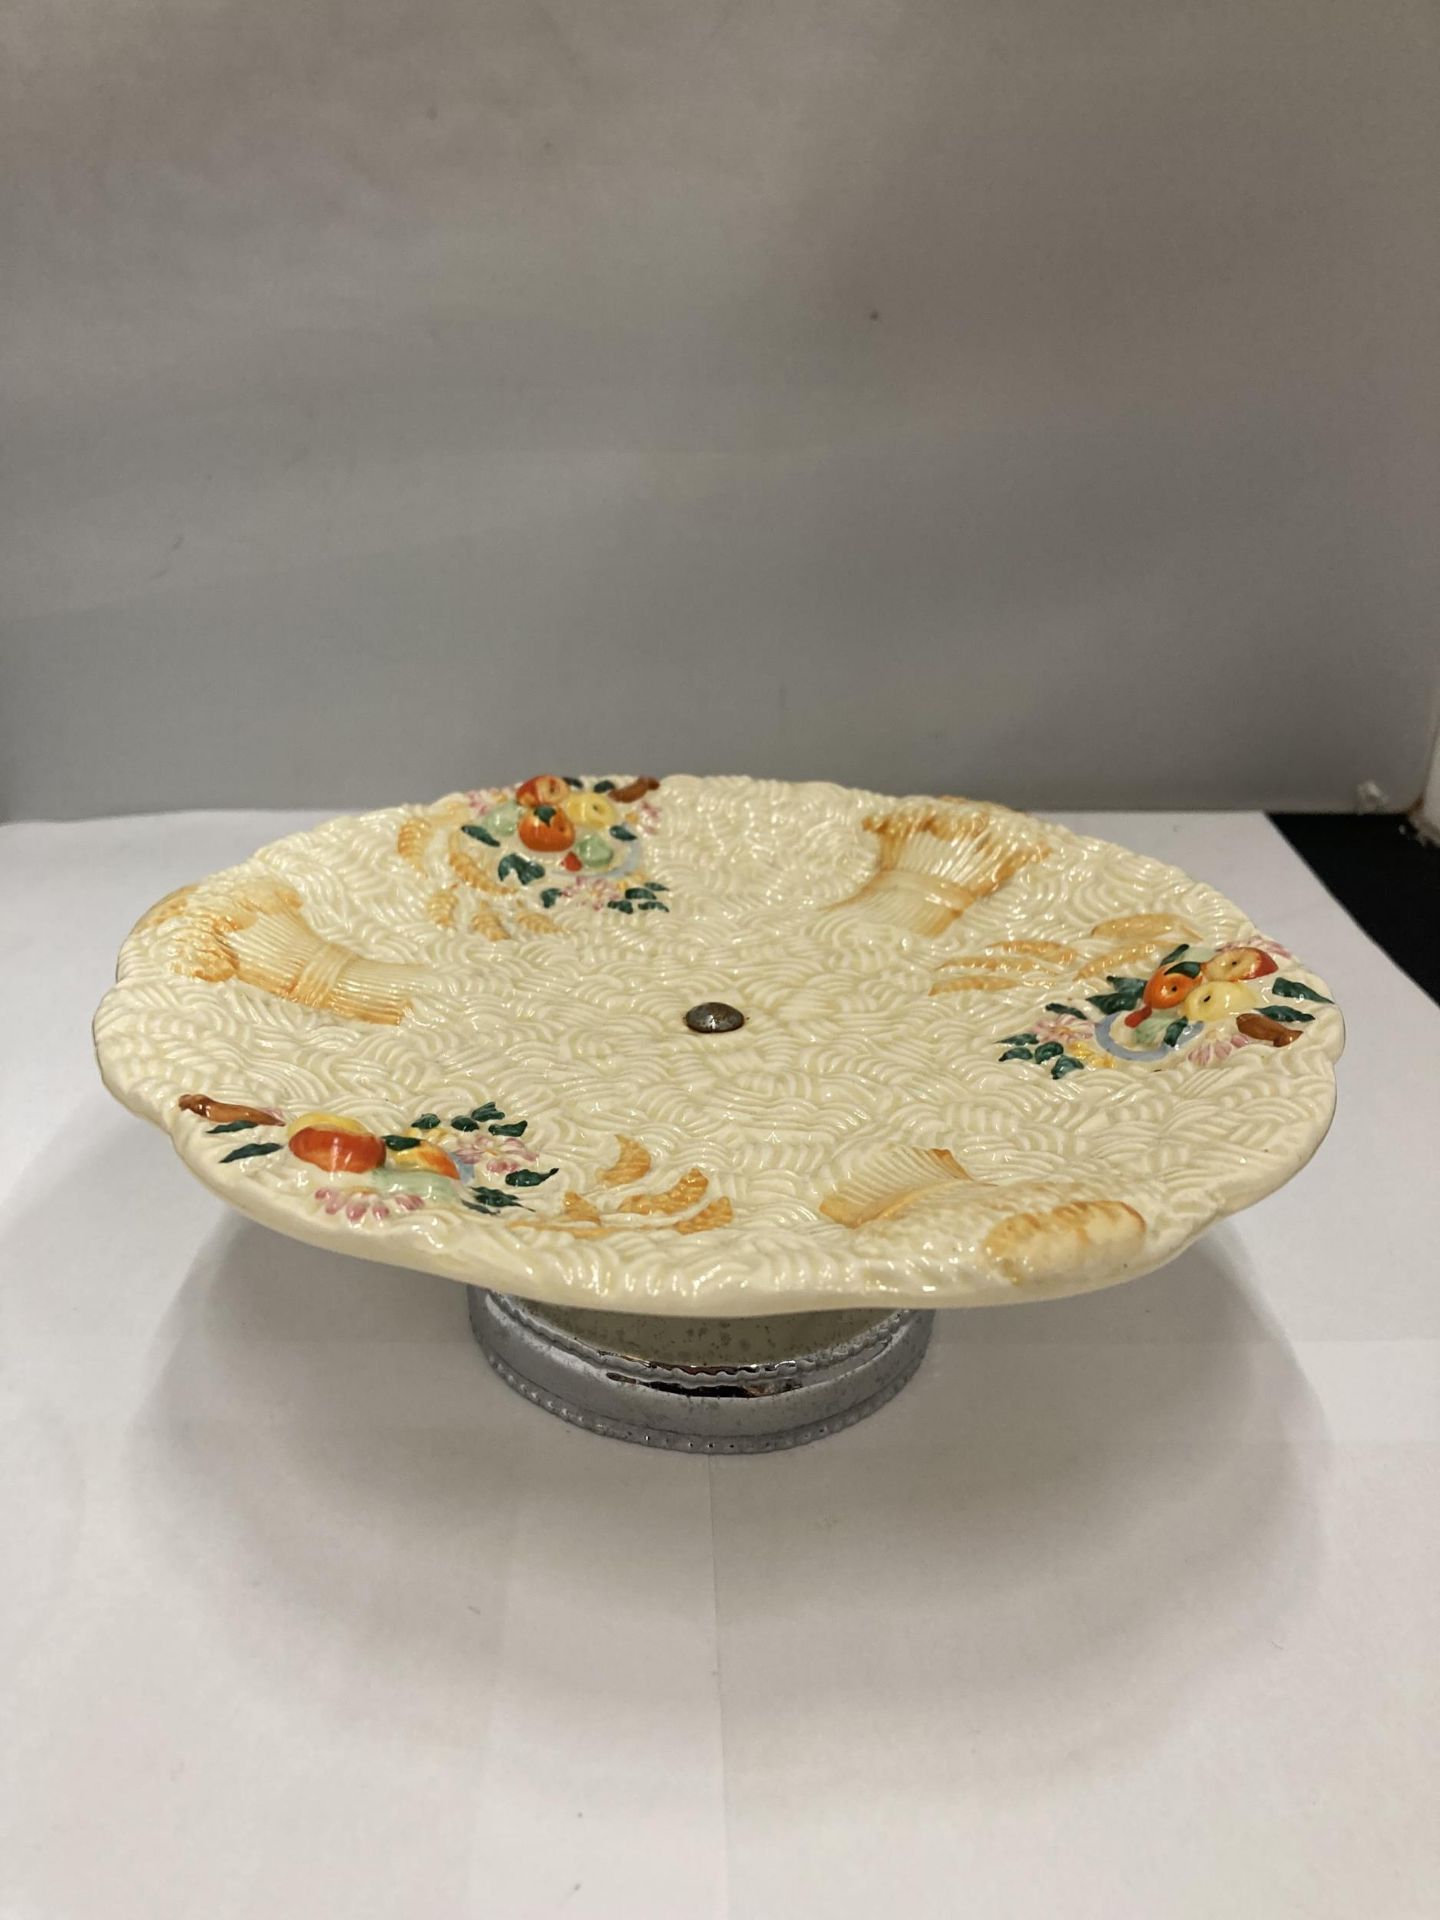 A CLARICE CLIFF 'CELTIC HARVEST' CAKE PLATE ON STAND, DIAMETER 20CM - Image 2 of 2